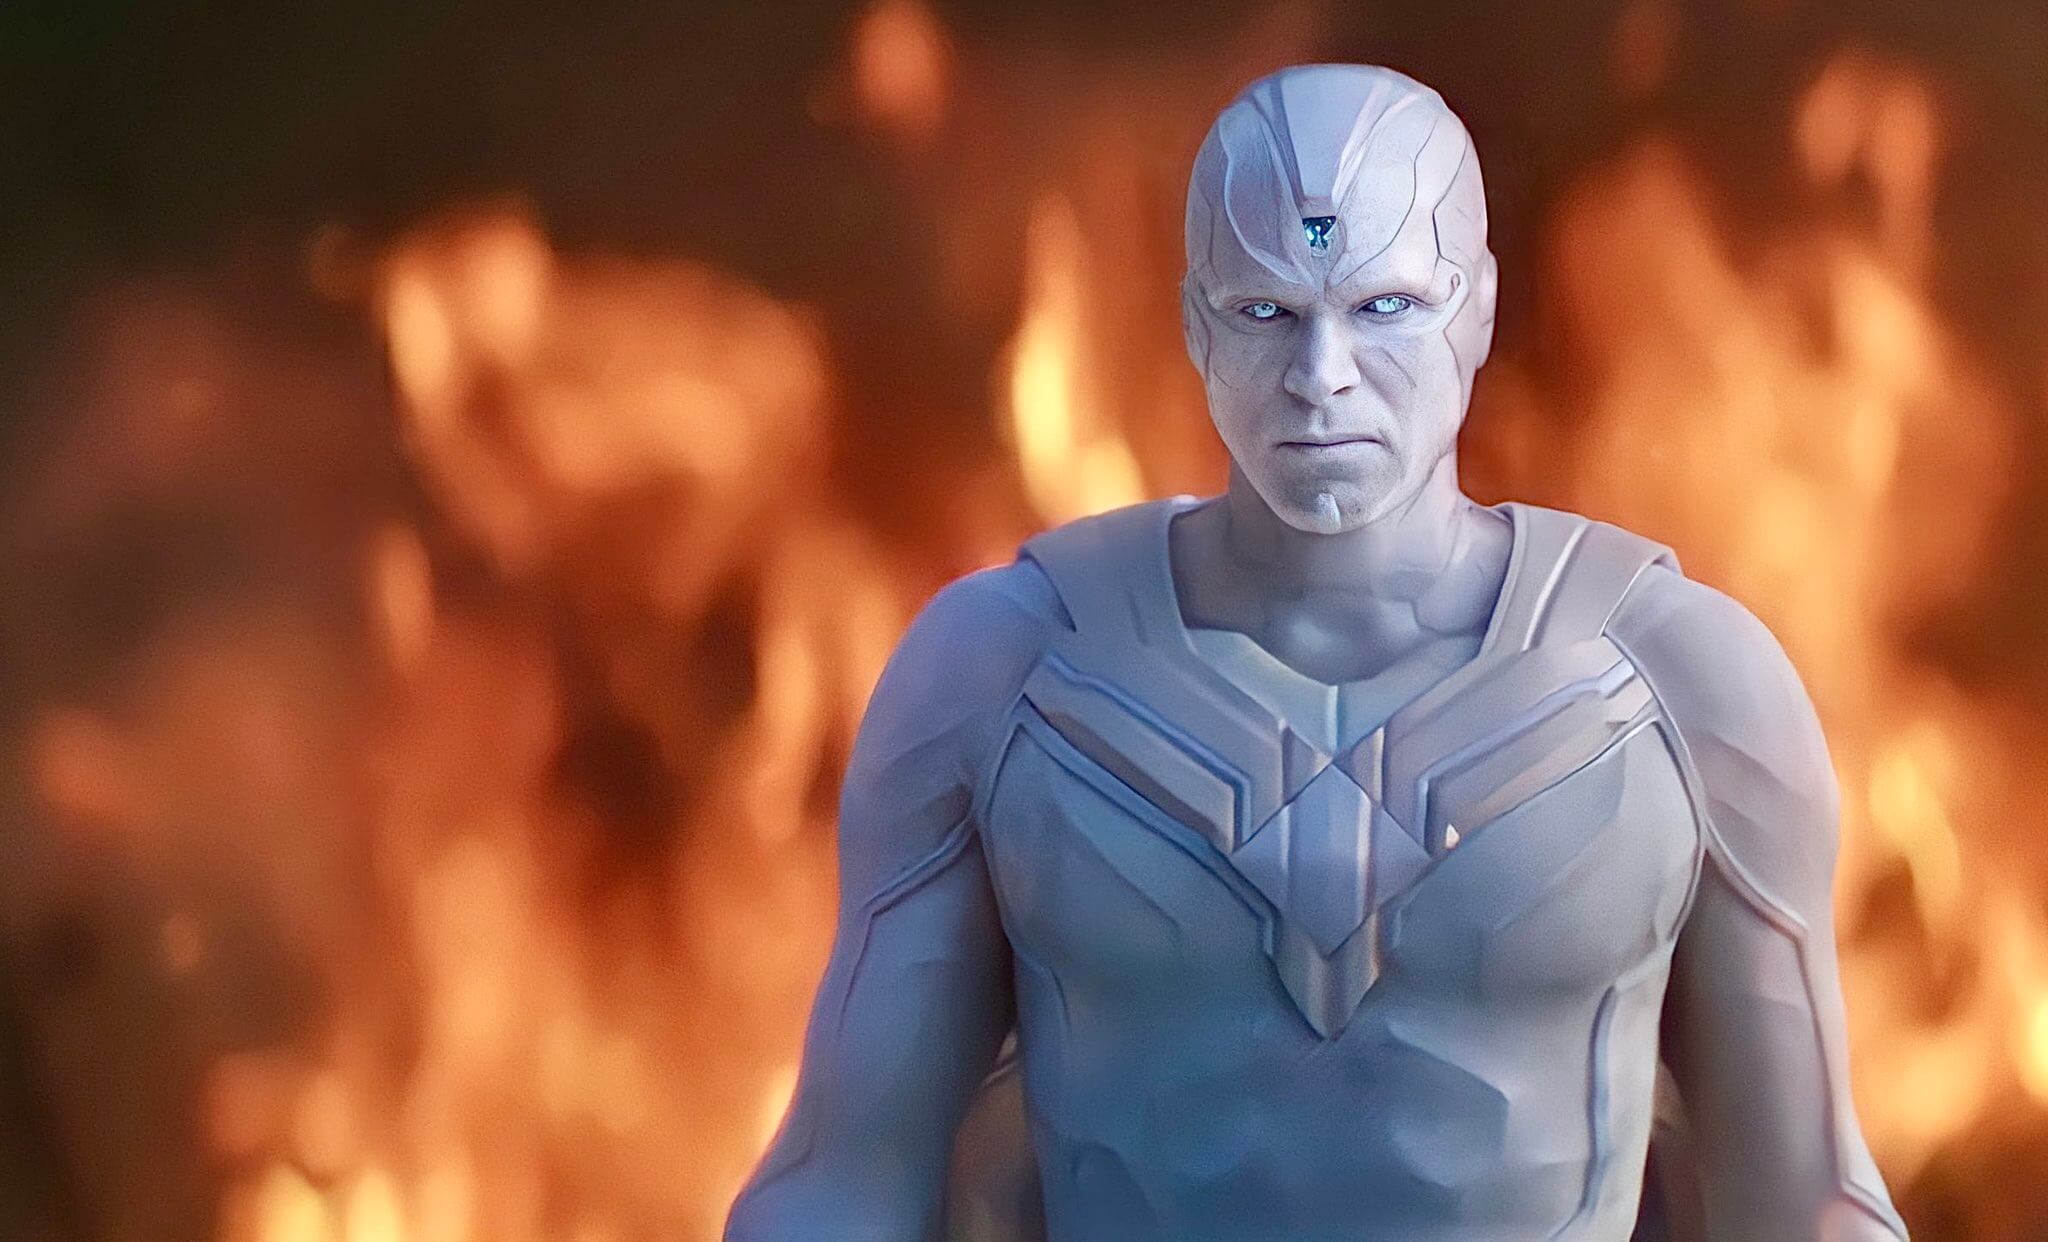 Paul Bettany as White Vision in WandaVision episode 9